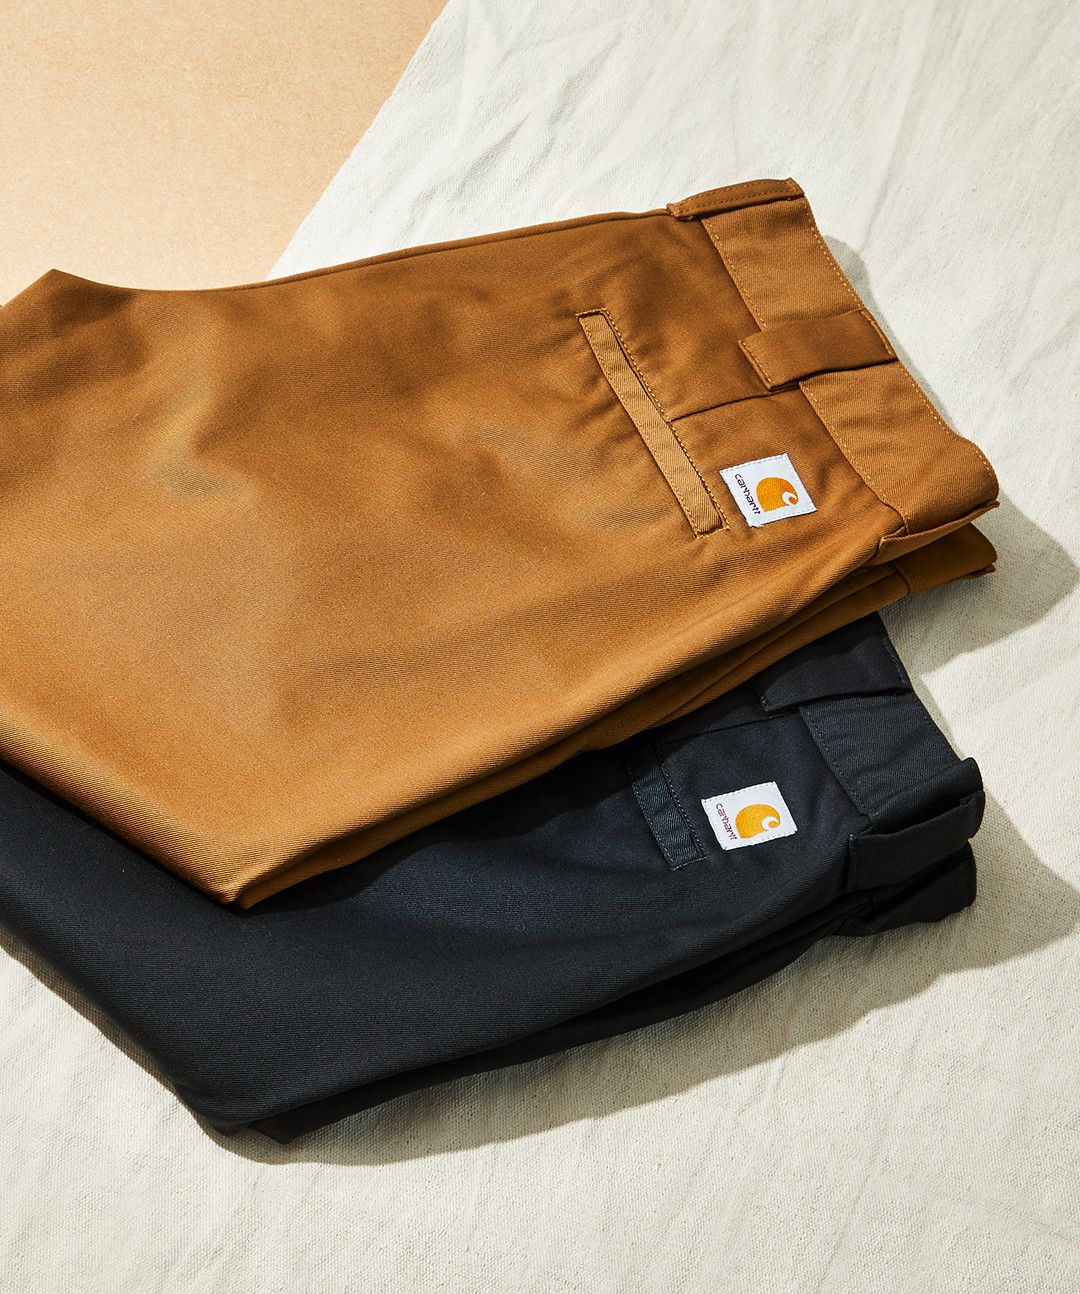 Carhartt WIP Master Pant Review - How the Carhartt Master Pant Fits